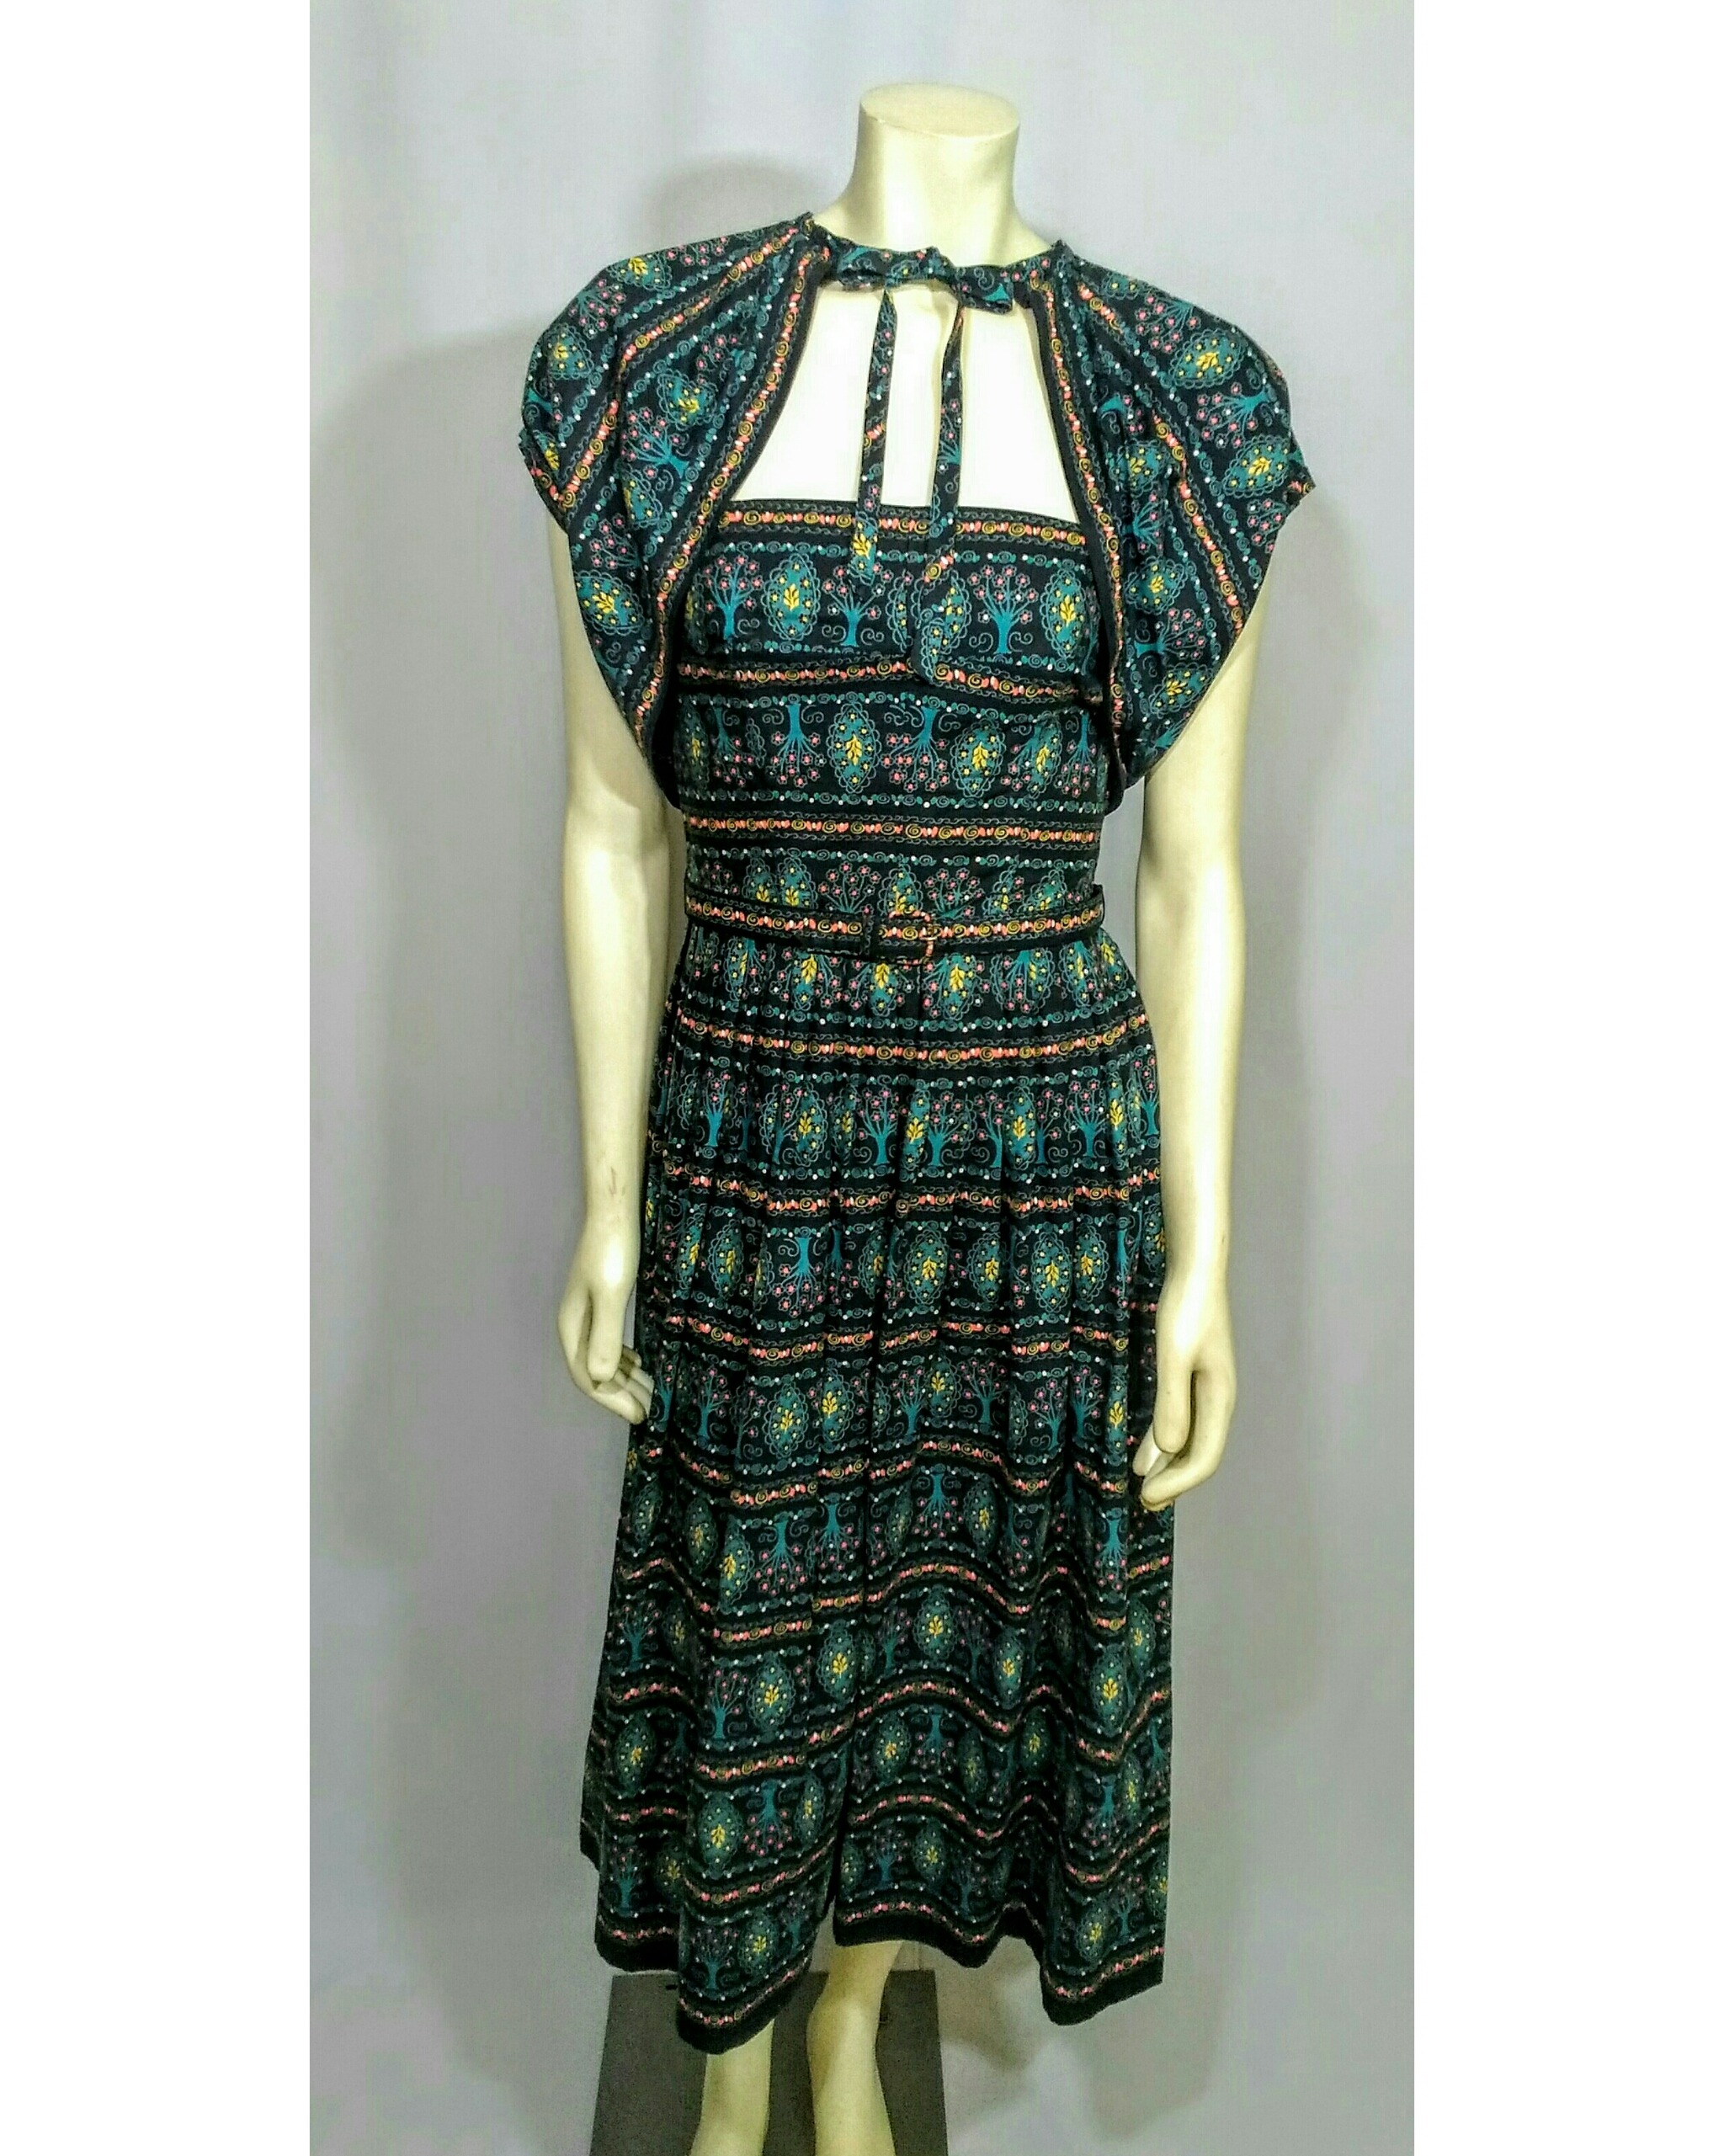 Vintage 1950’s Strapless Dress with Matching Shrug and Belt (Tree Patterned Design)